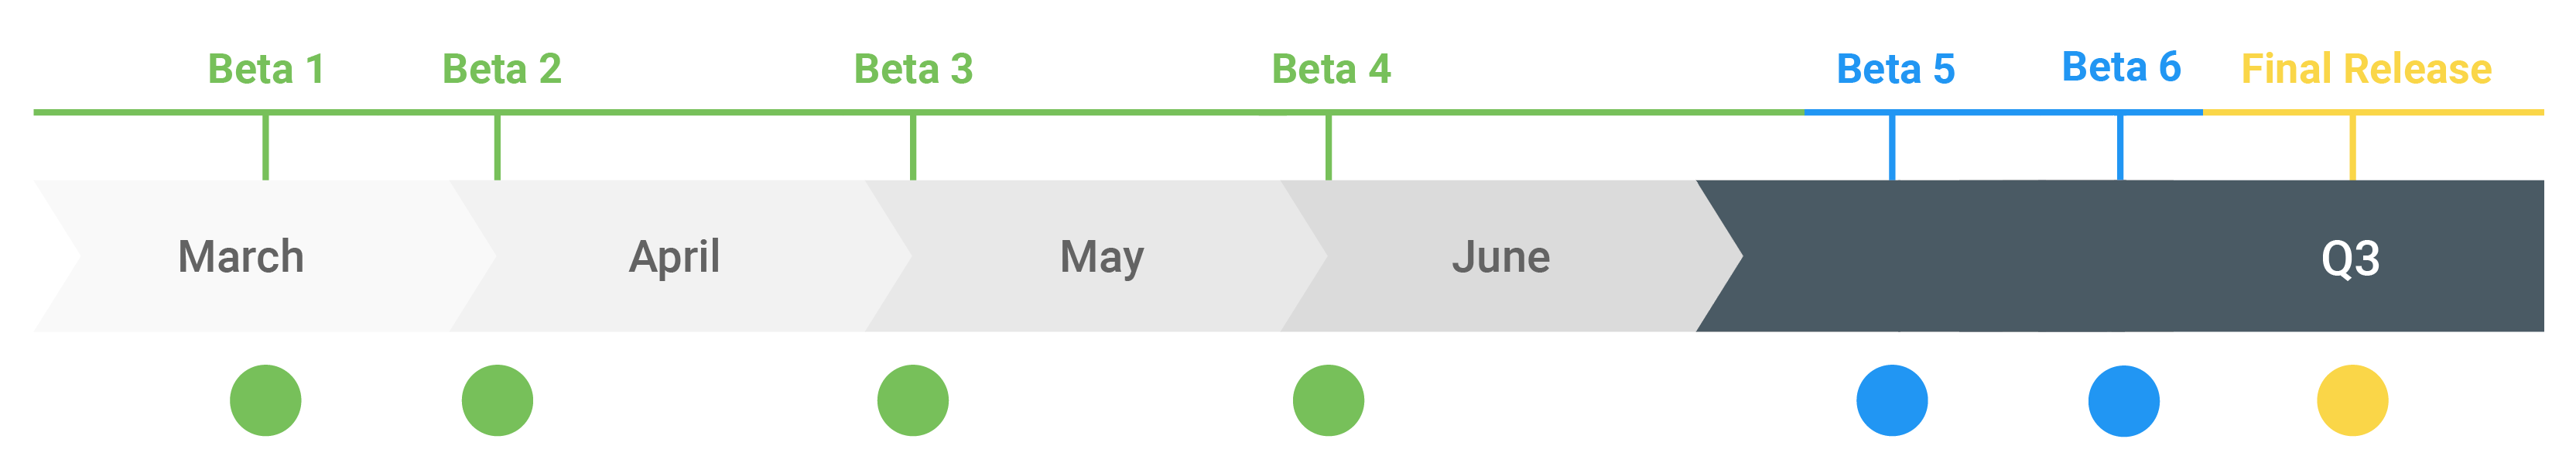 Google to release six Android Q beta builds, final version drops in Q3